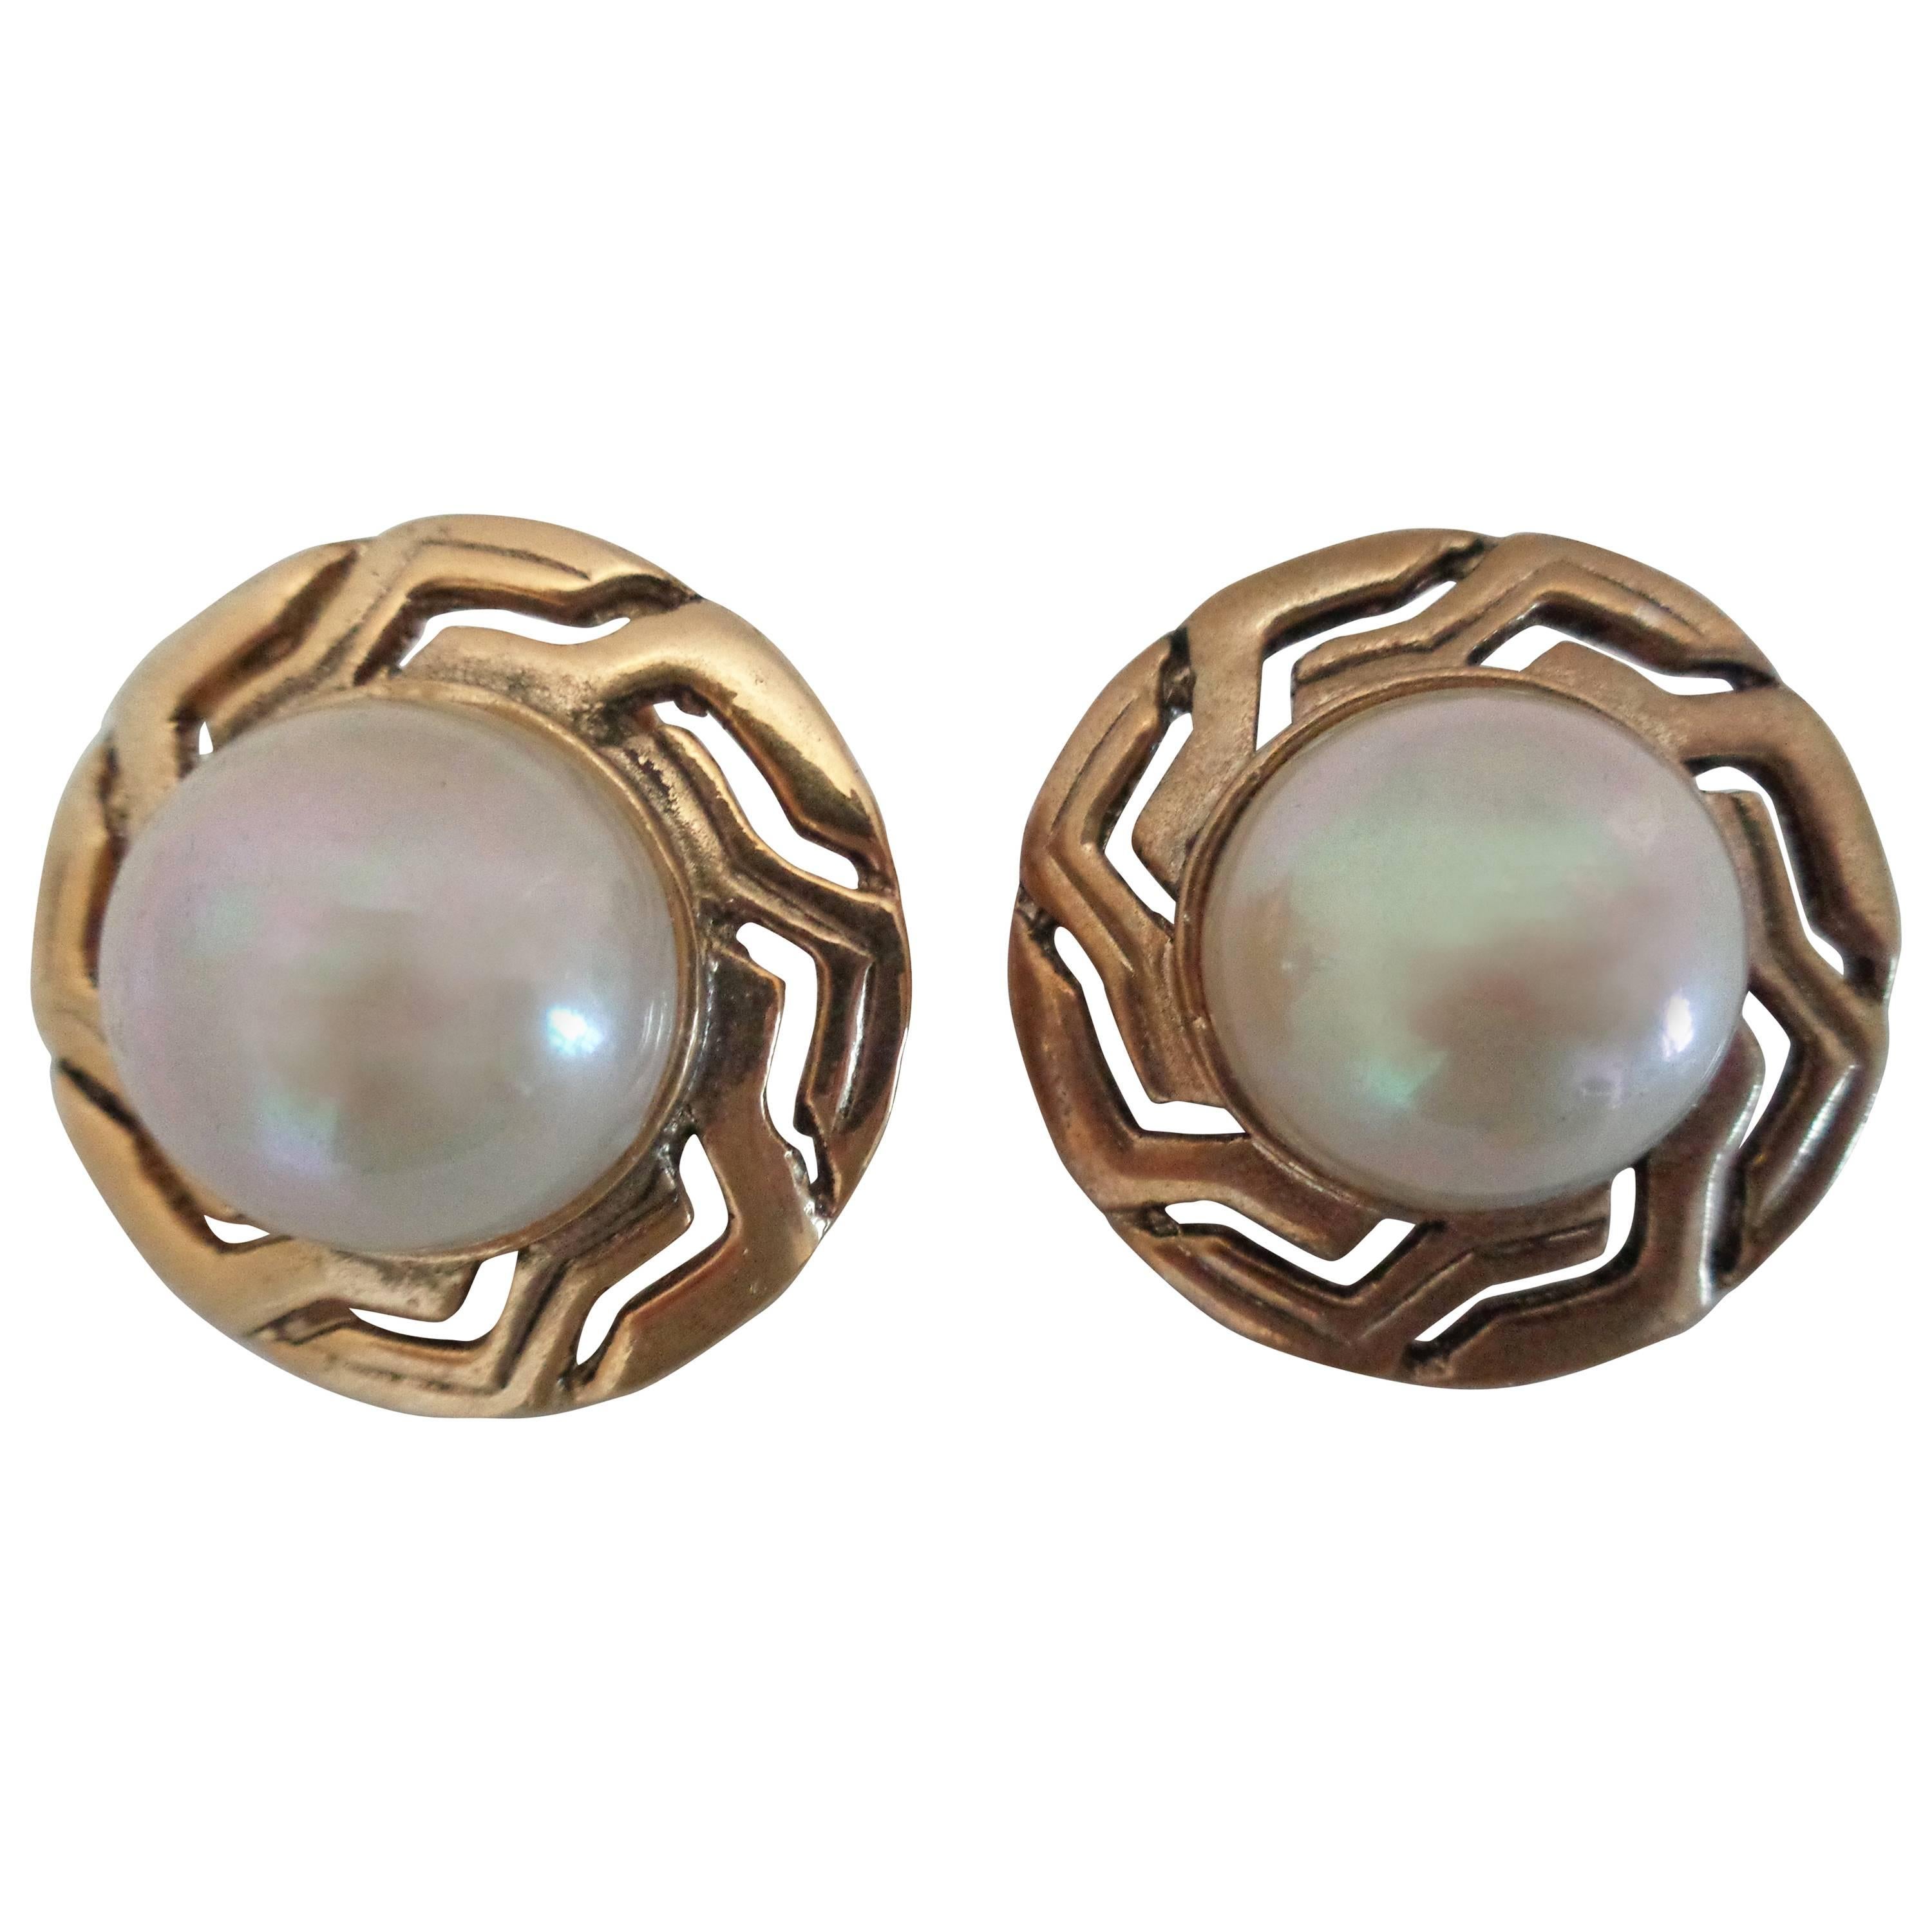 1990s Gold Tone Faux Pearls Clip on earrings